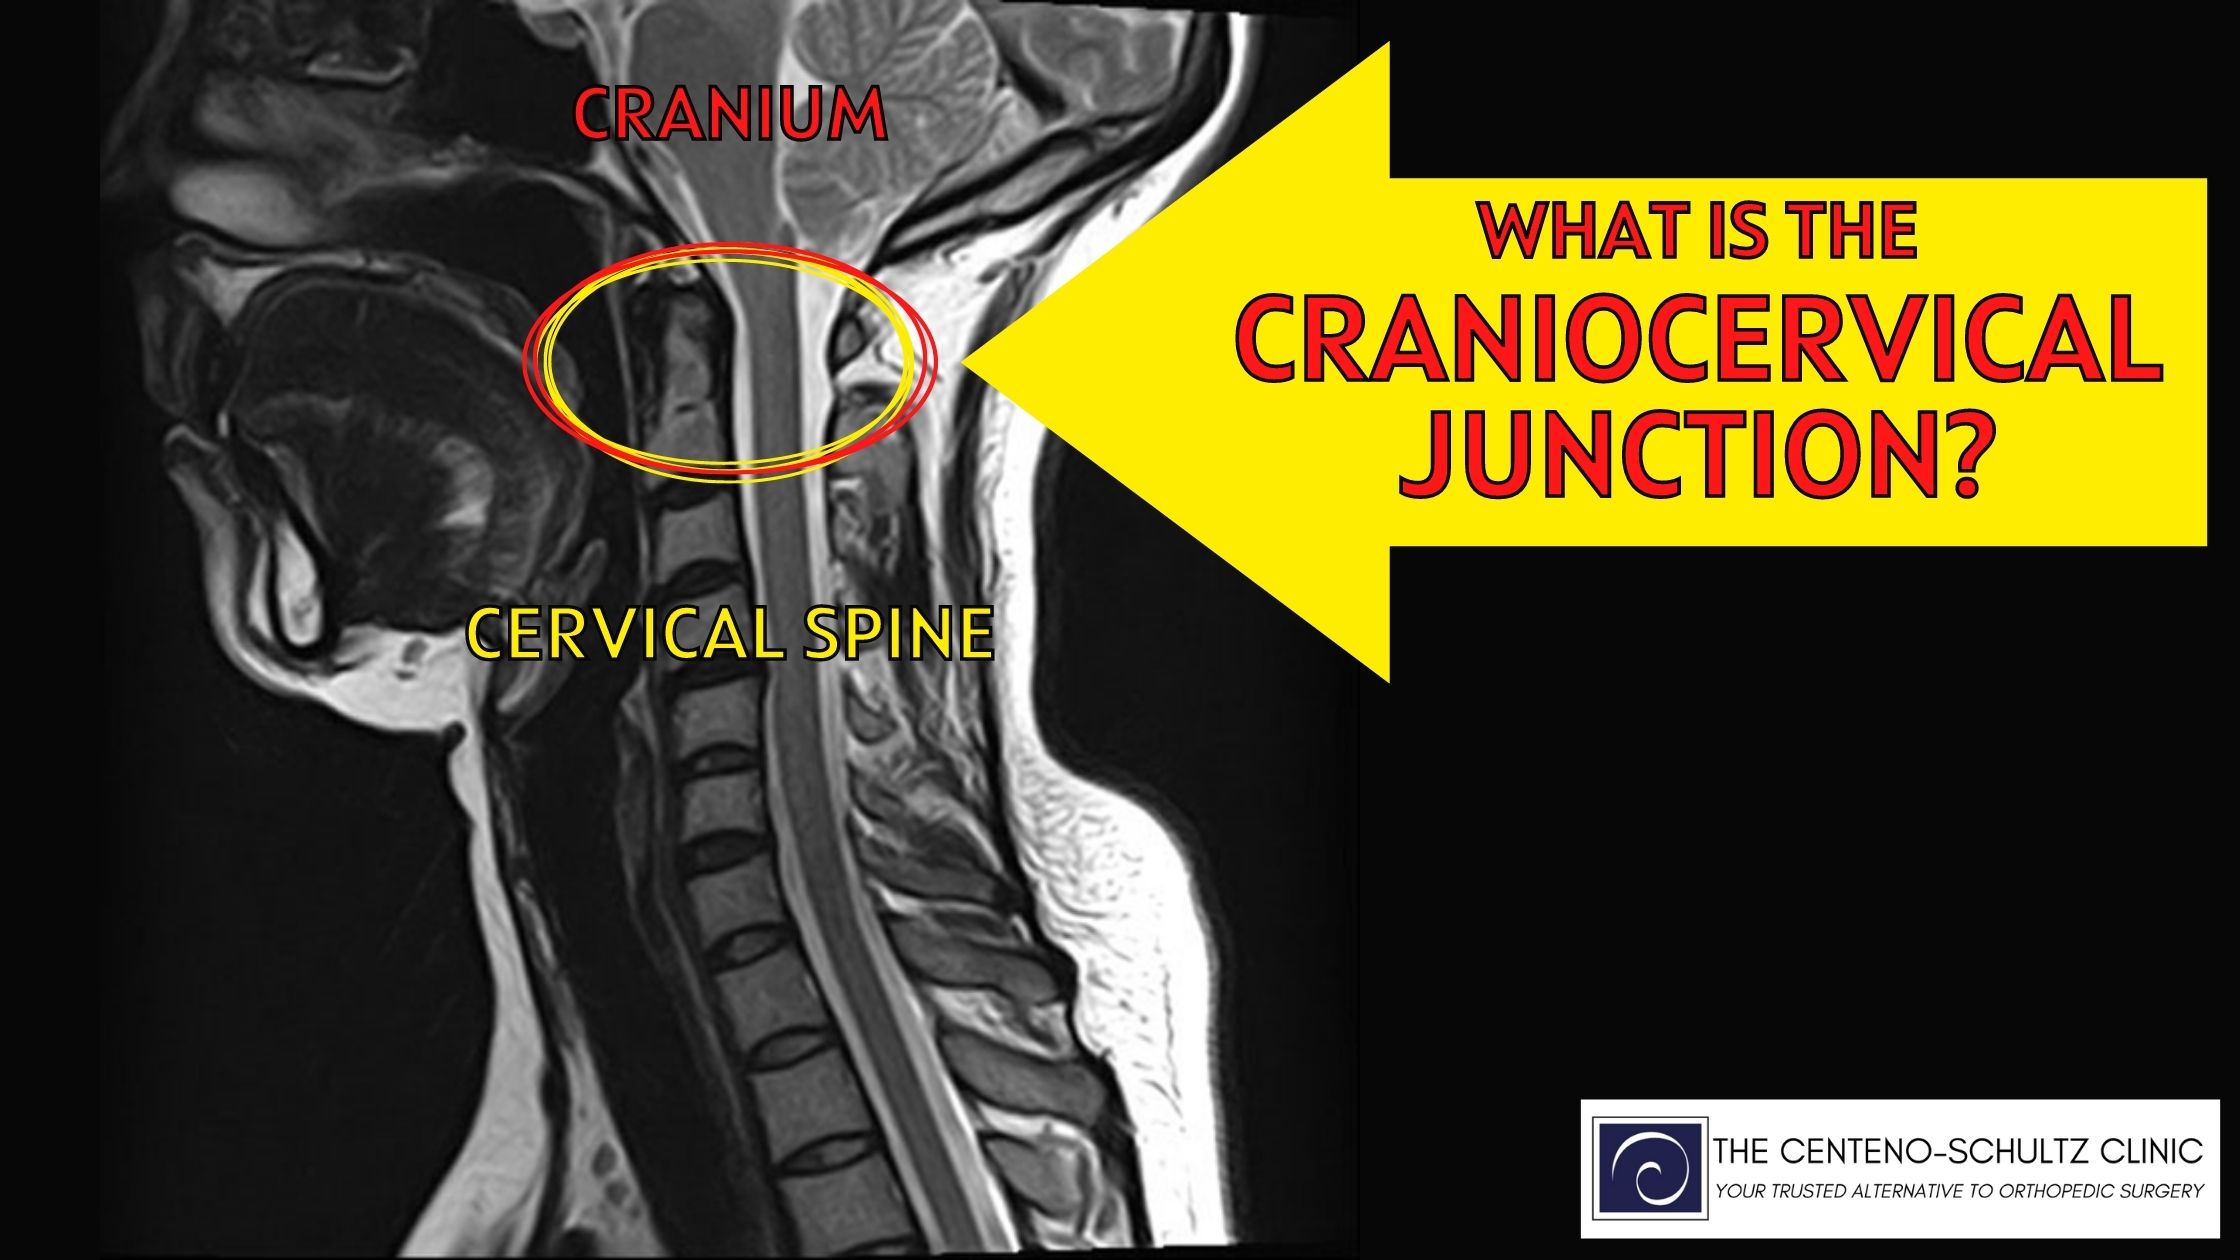 What is Craniocervical Junction?